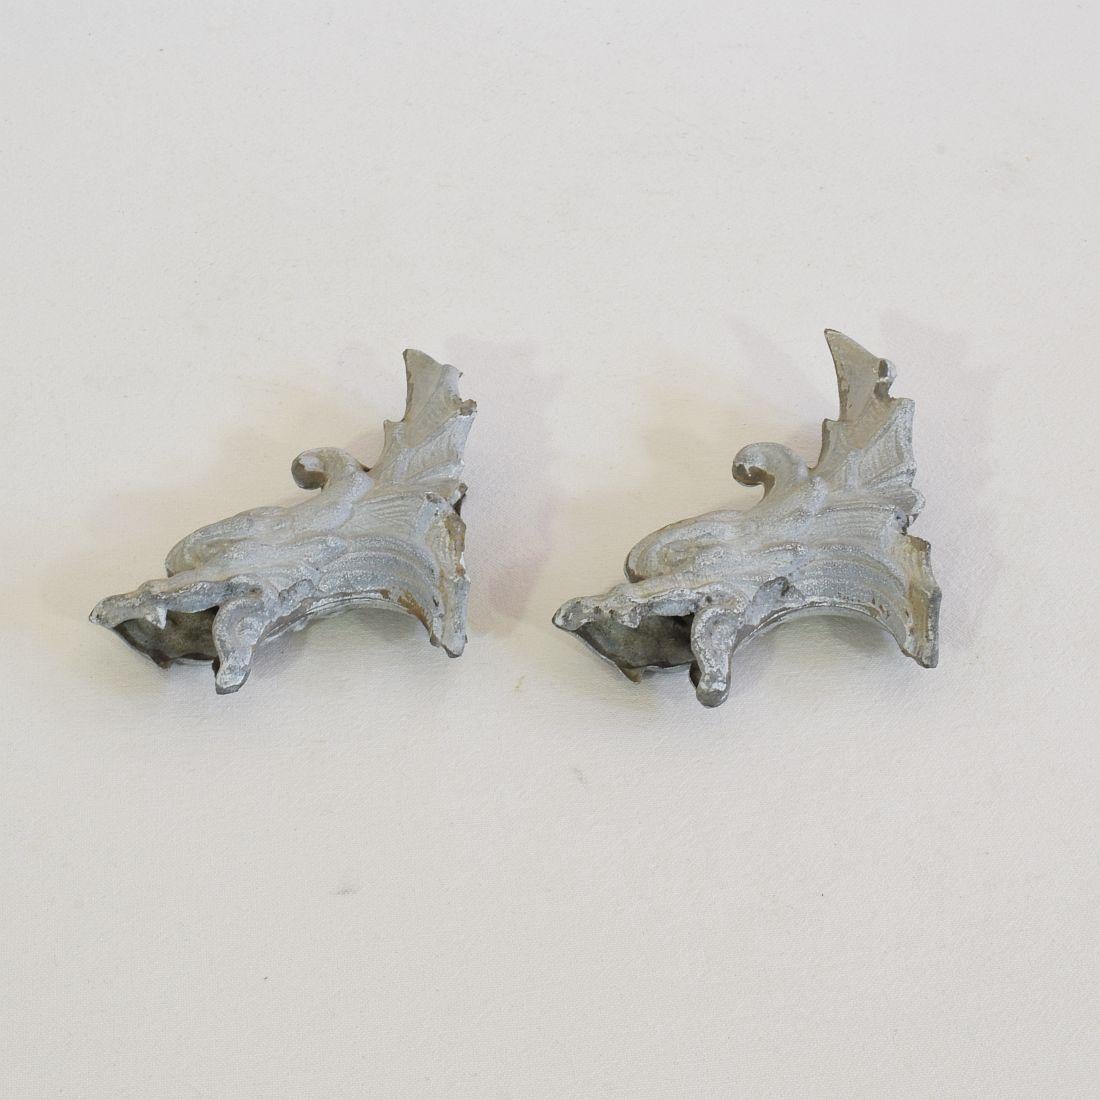 Pair of Small 19th Century French Zinc Roof Ornaments/ Gargoyles 15